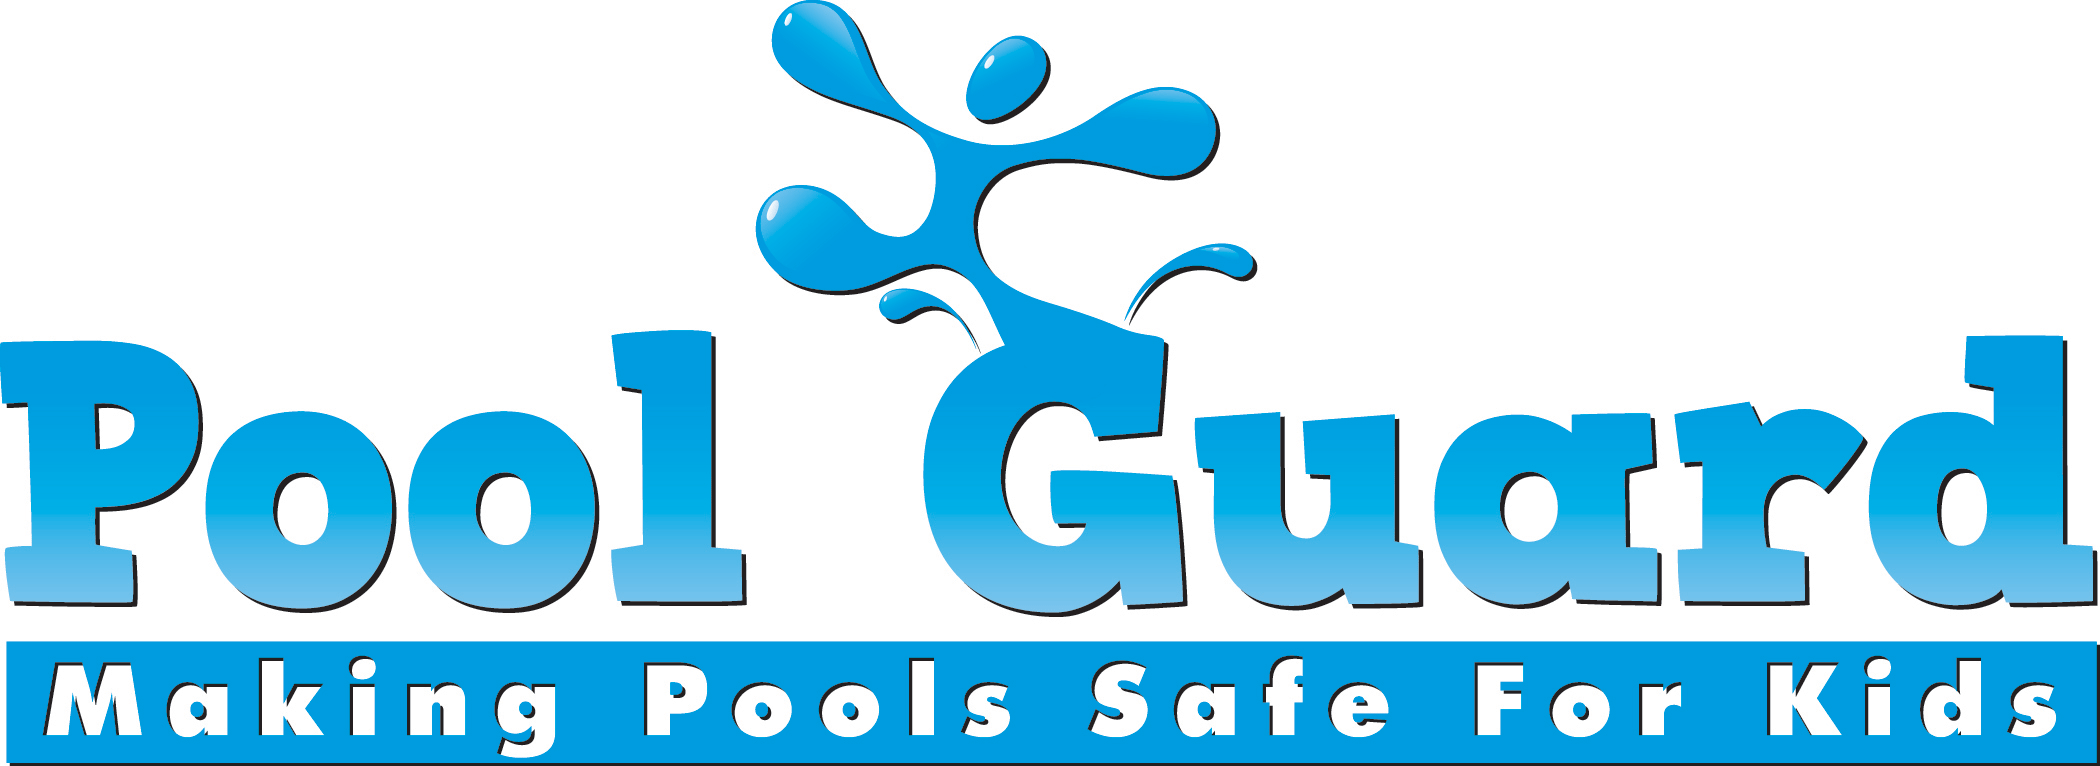 Parker Pools recommends Pool Guard of the Gulf Coast for Pool Fences